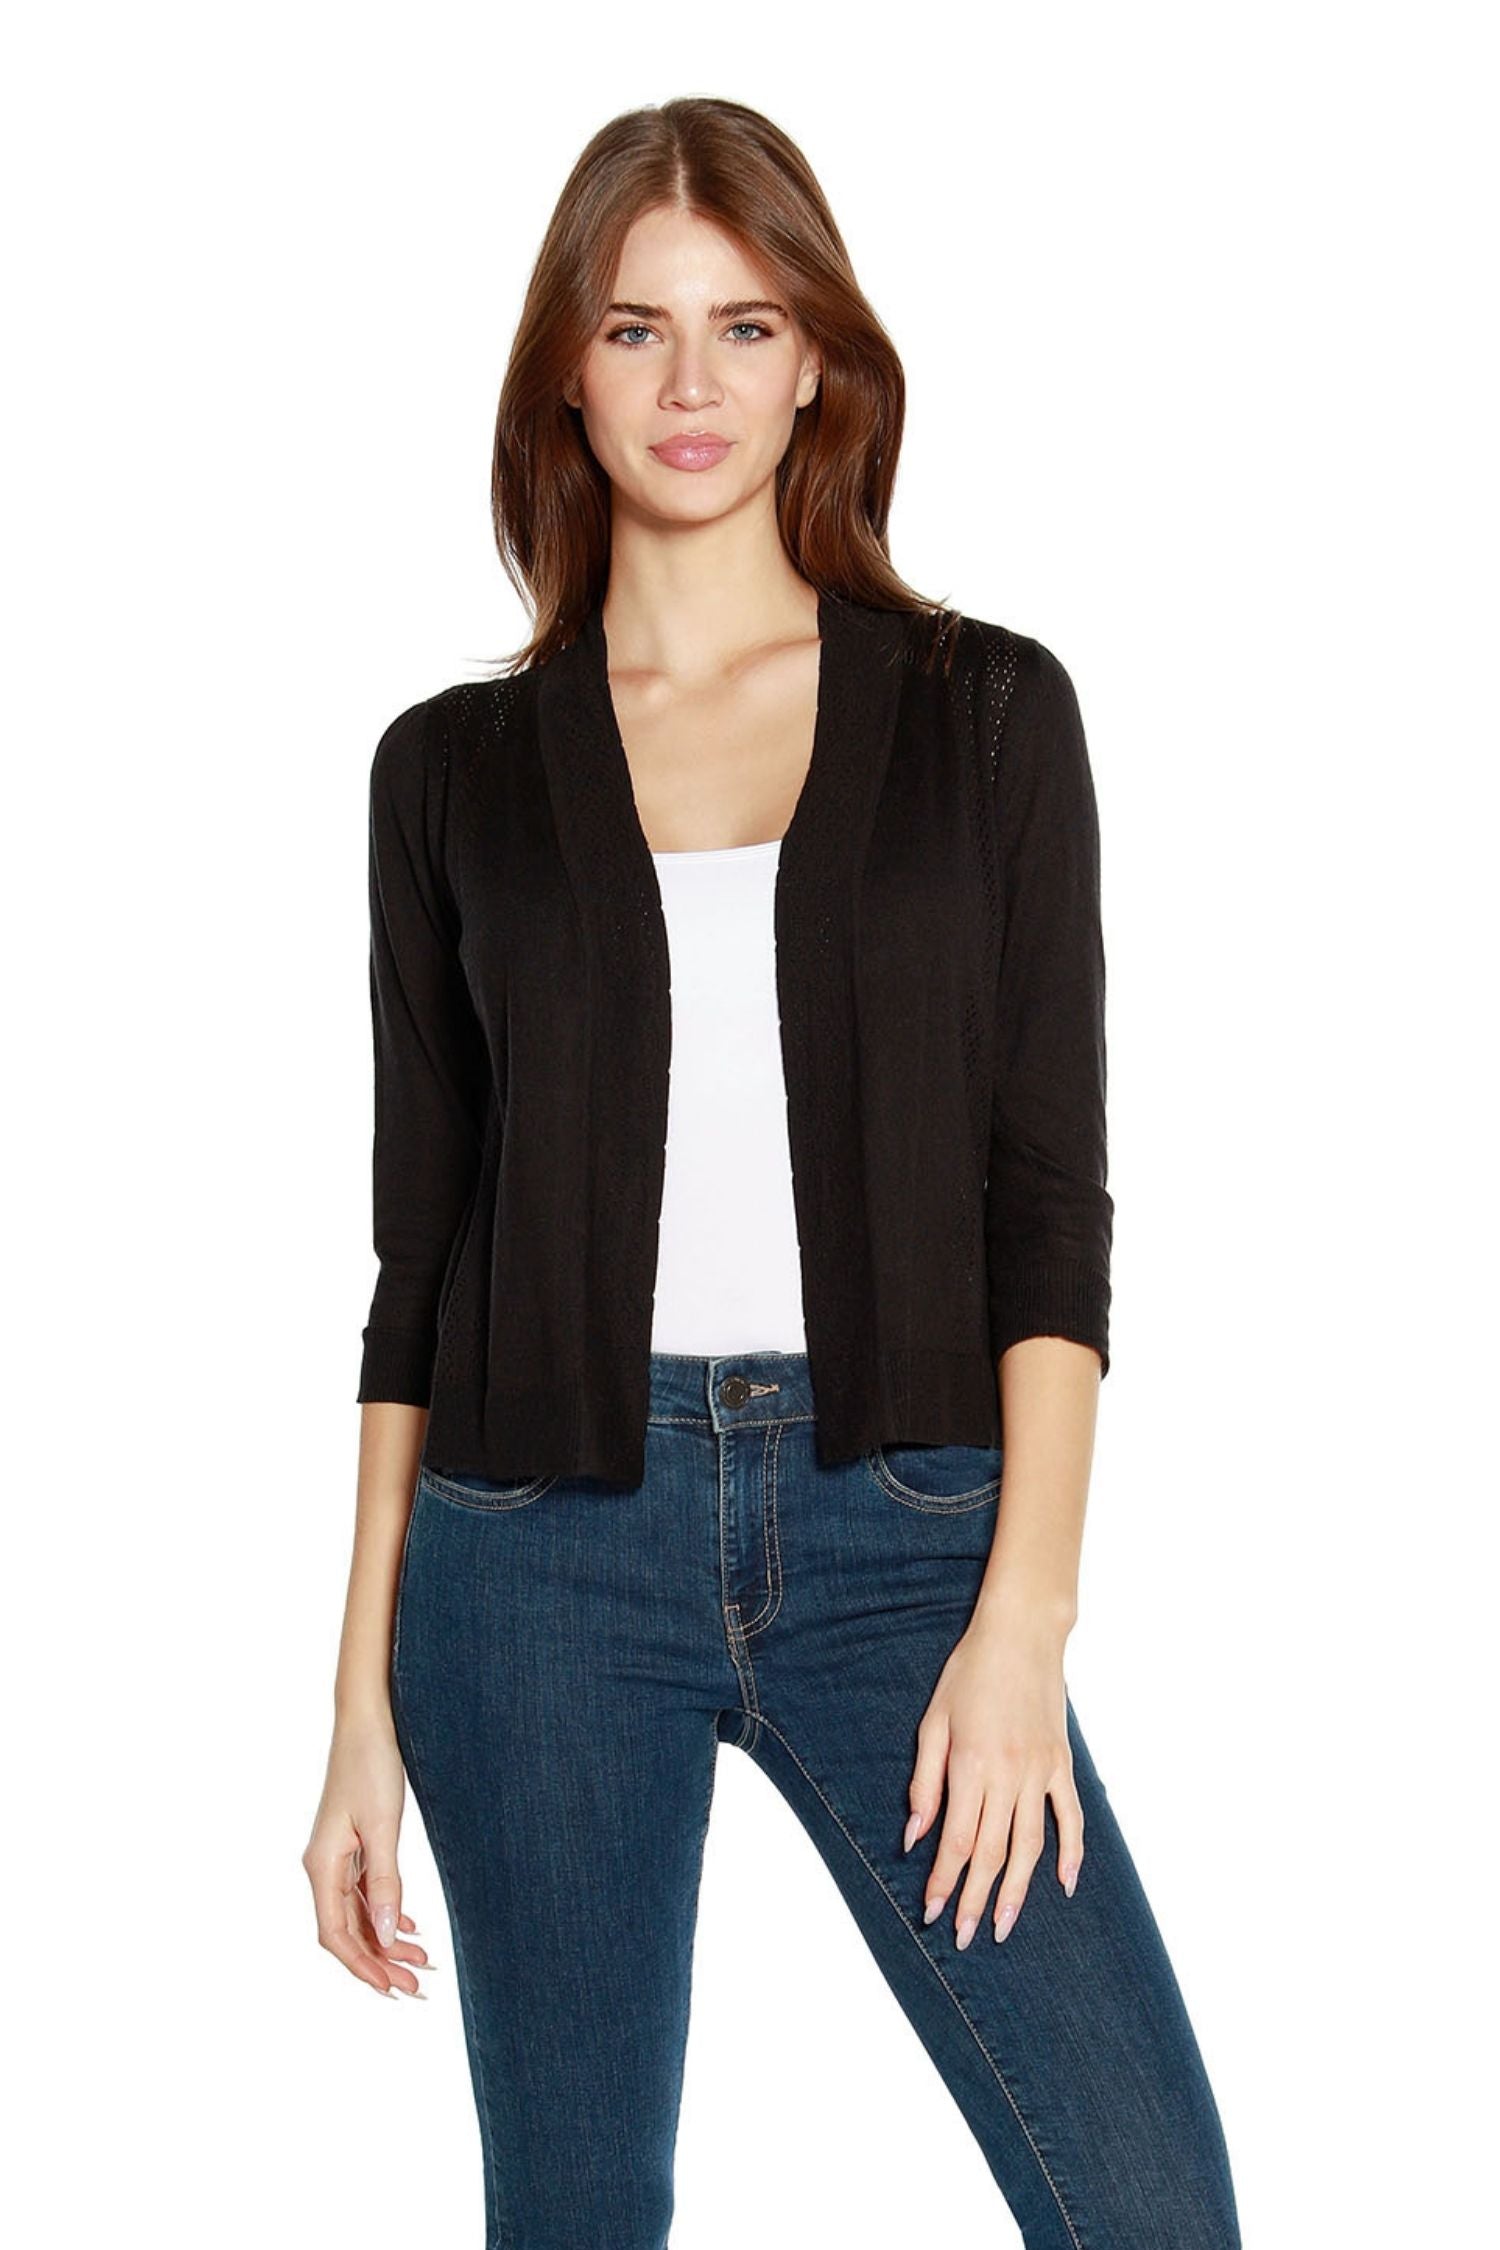 Women’s Cropped Cardigans with 3/4 Sleeves and Pointelle Stitch